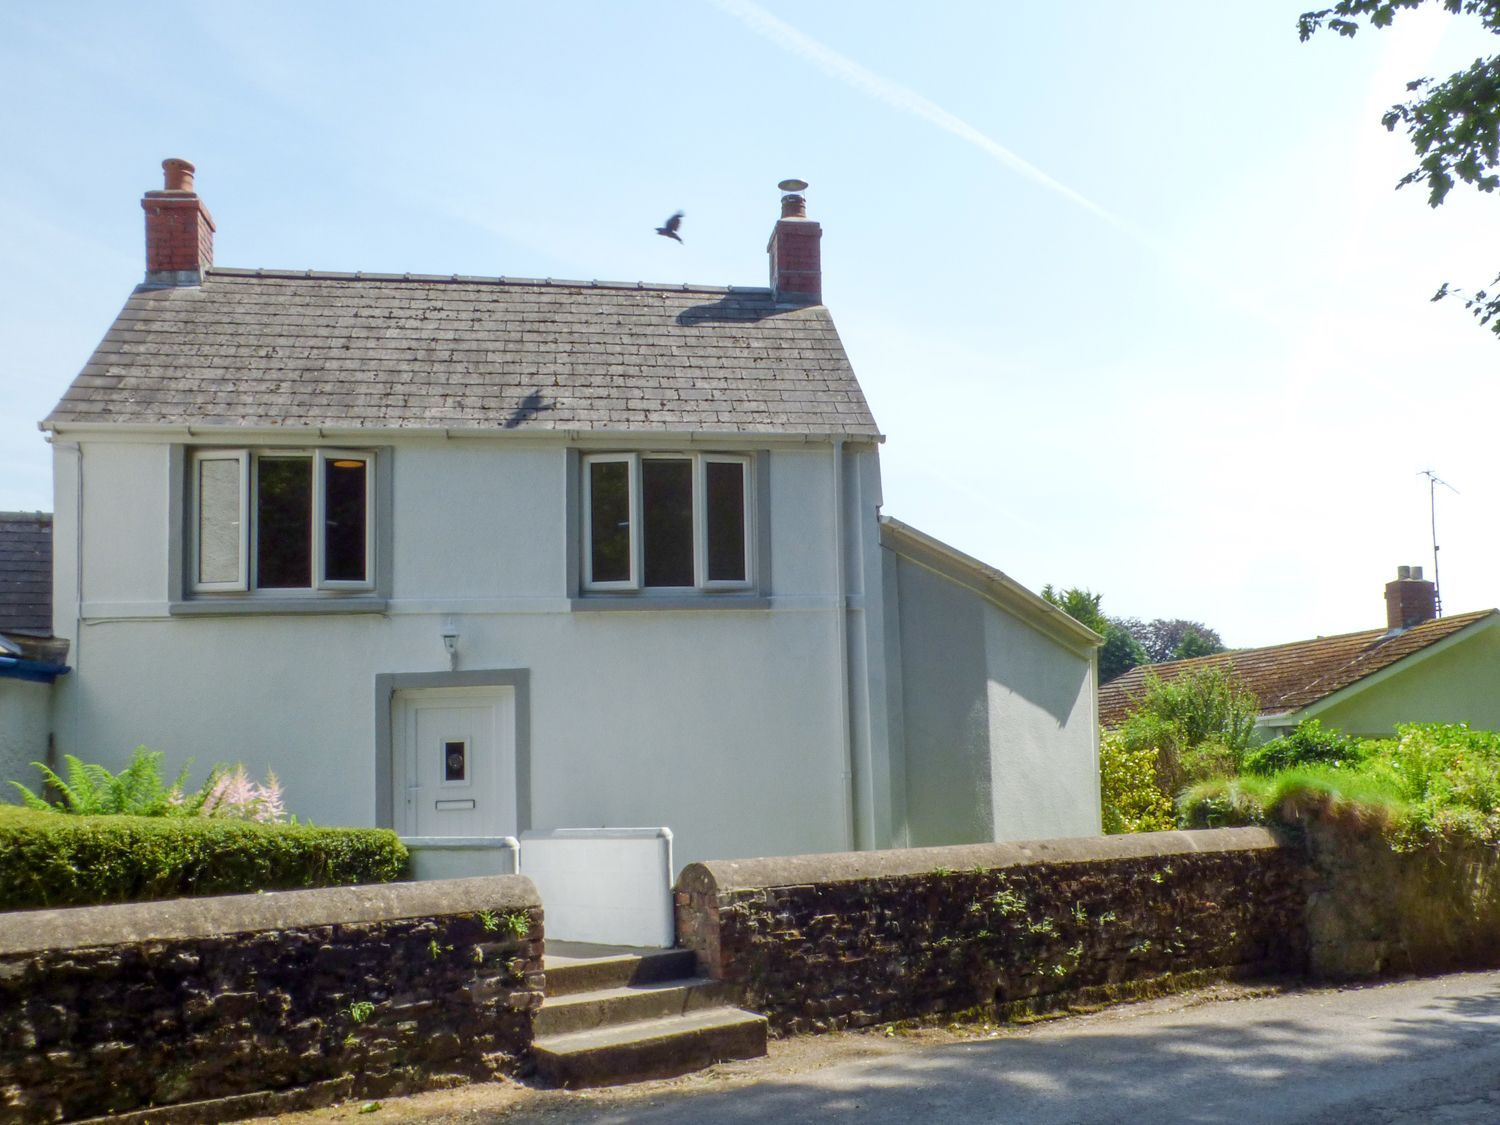 Spring Garden Cottage - South Wales - 1128135 - photo 1